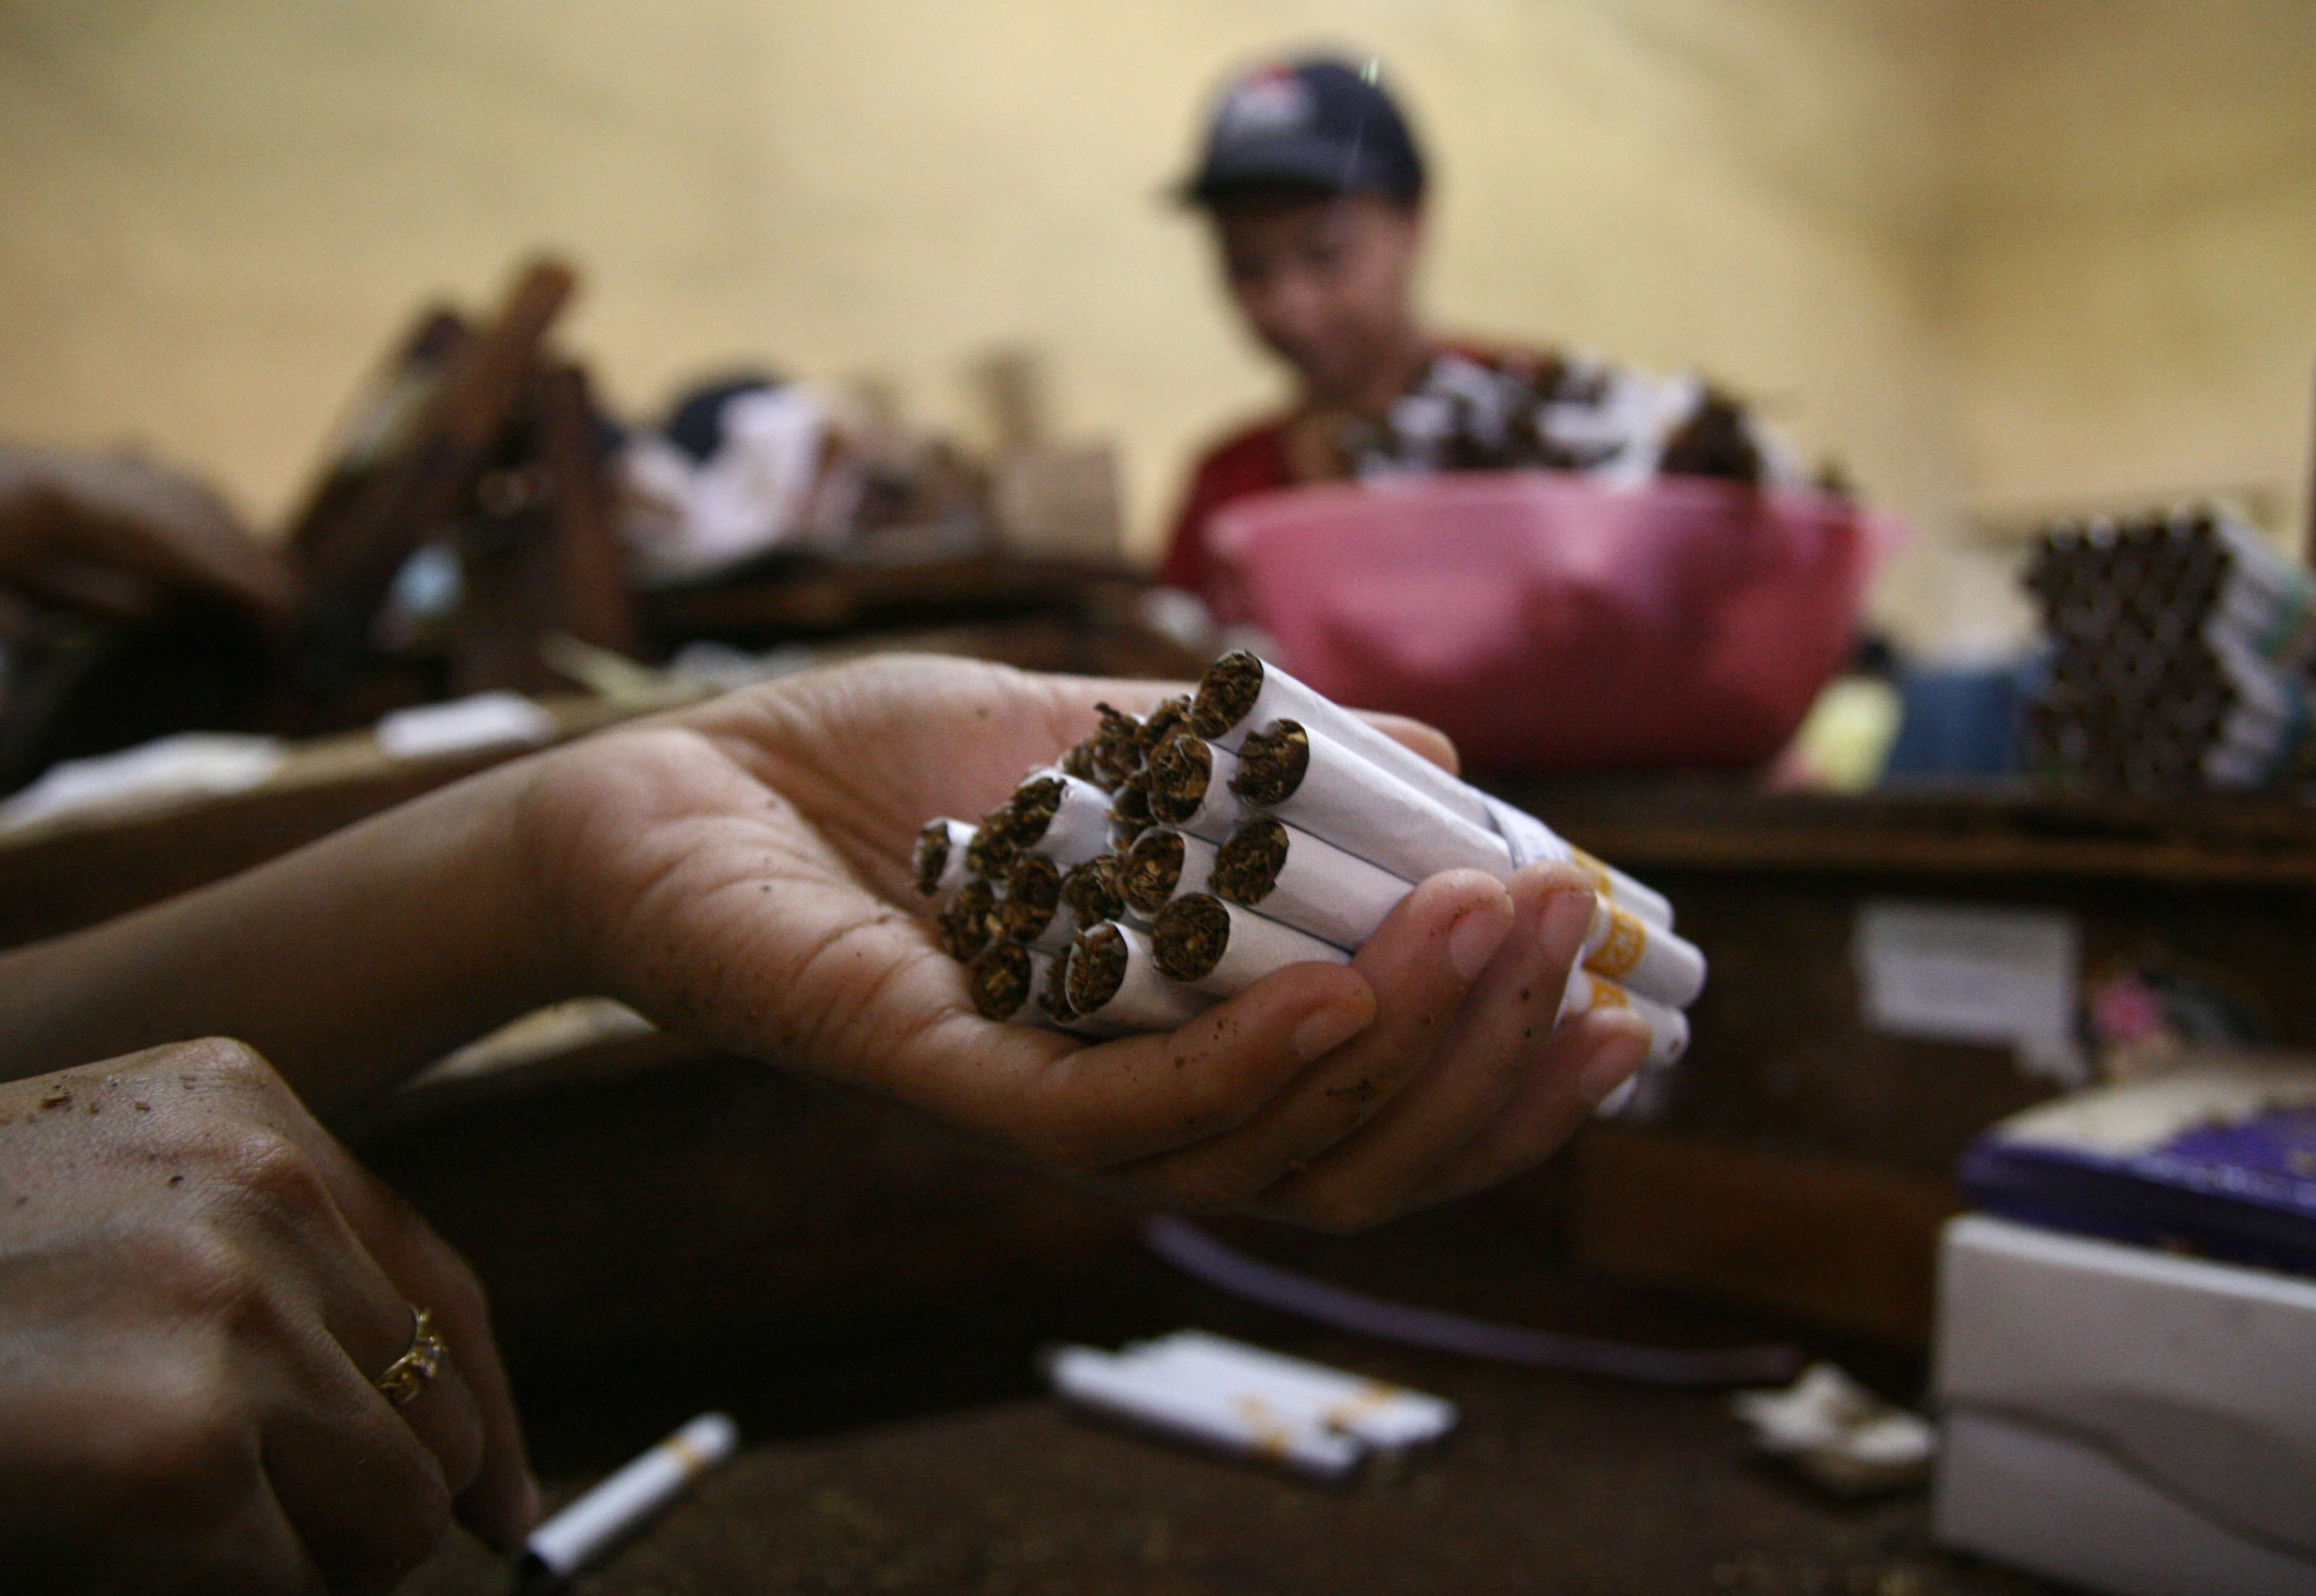 In this photograph taken on January 29, 2013 a person holds cigarettes in a local Indonesian tobacco company employing 600 women workers in Malang located in East Java province. Indonesian President Susilo Bambang Yudhono signed a tobacco regulation on December 24, 2012 in an effort to curb tobacco consumption which has faced staunch opposition from the cigarette lobby. More than 237,000 people work in the countrys tobacco industry, producing some 190 billion cigarettes, according to data from the World Health Organization.  AFP PHOTO / AMAN ROCHMAN / AFP PHOTO / AMAN ROCHMAN